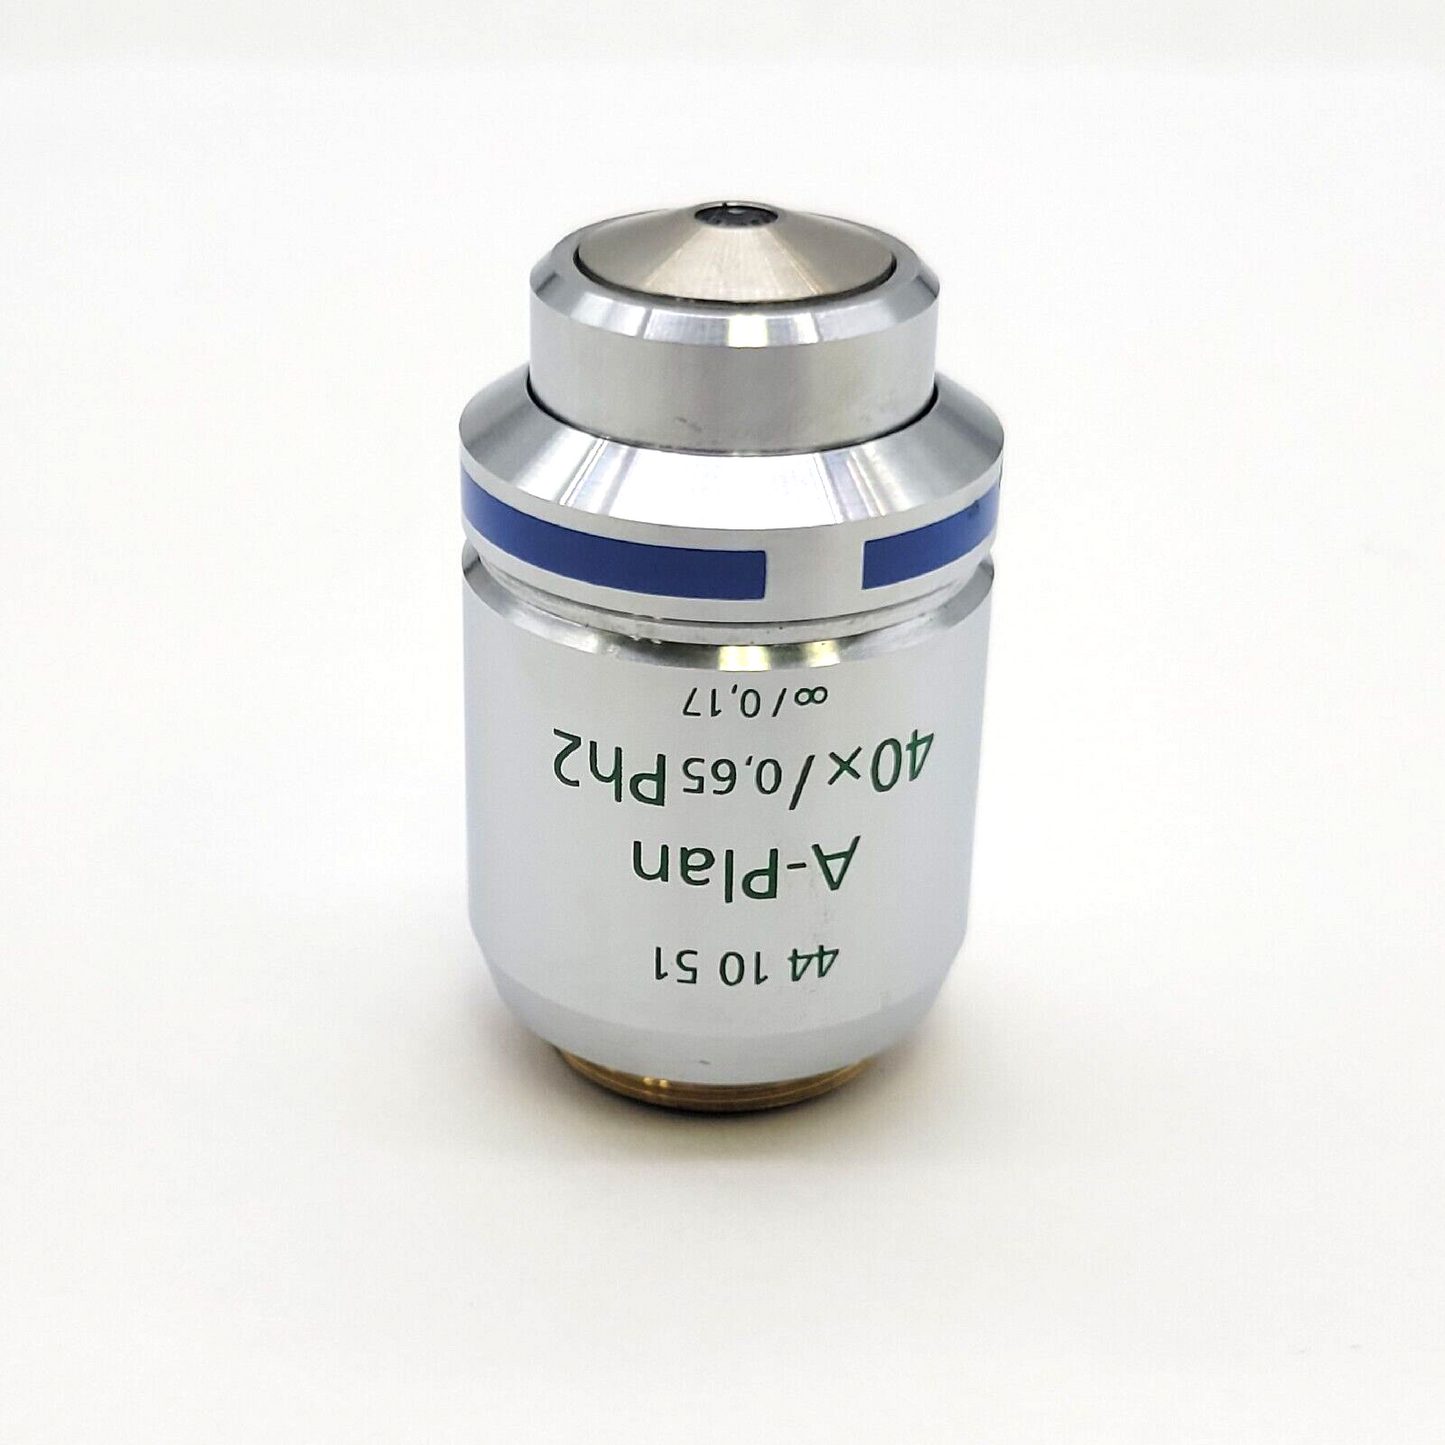 Zeiss Microscope Objective A-Plan 40x Ph2 ∞/0.17 Phase Contrast RMS 441051 - microscopemarketplace